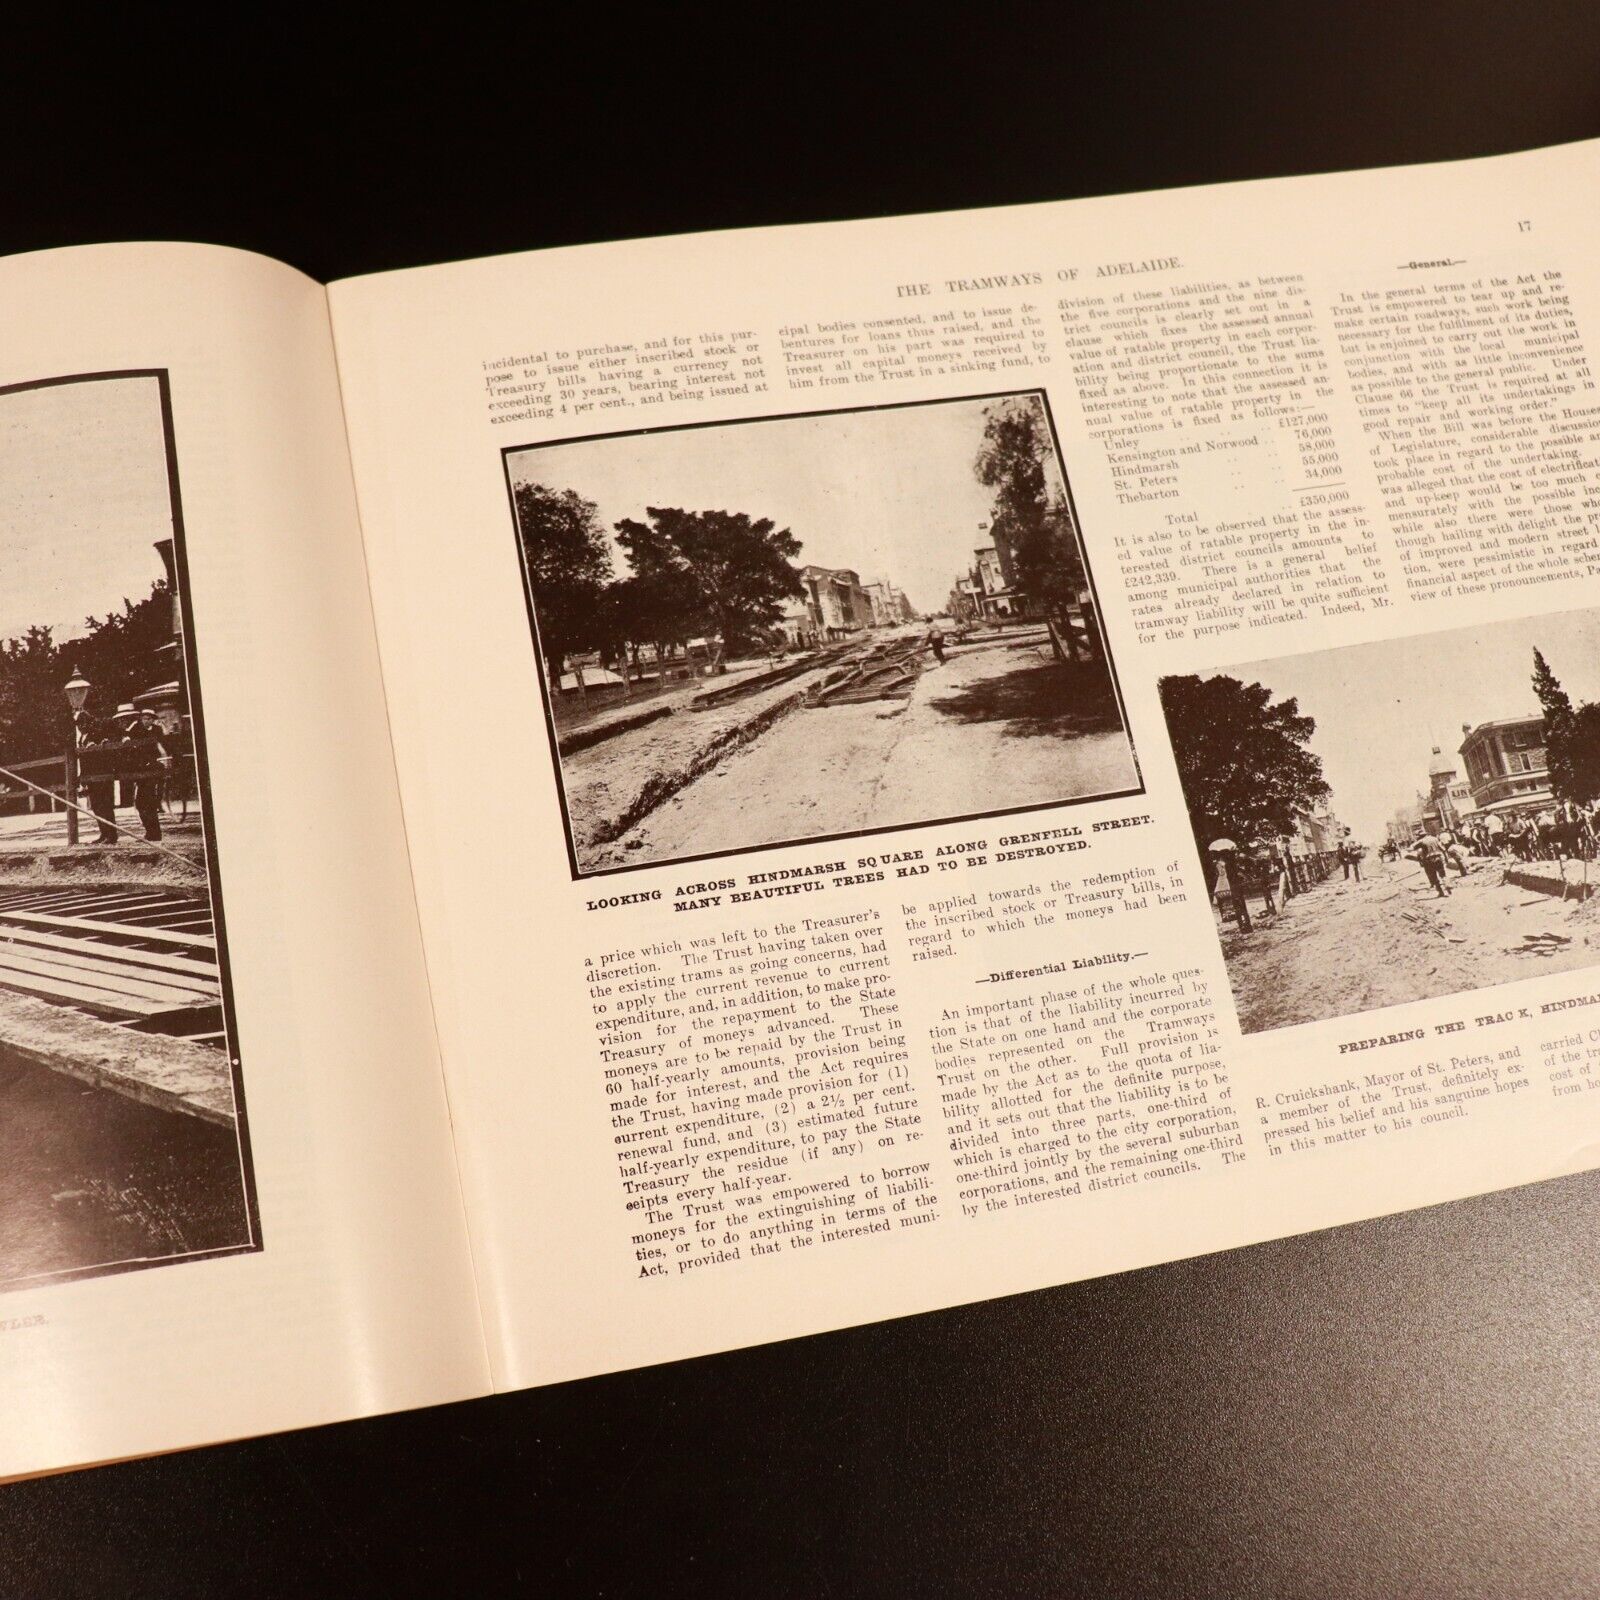 The Tramways Of Adelaide Electric Trolley Australian Rail & Tram History Book